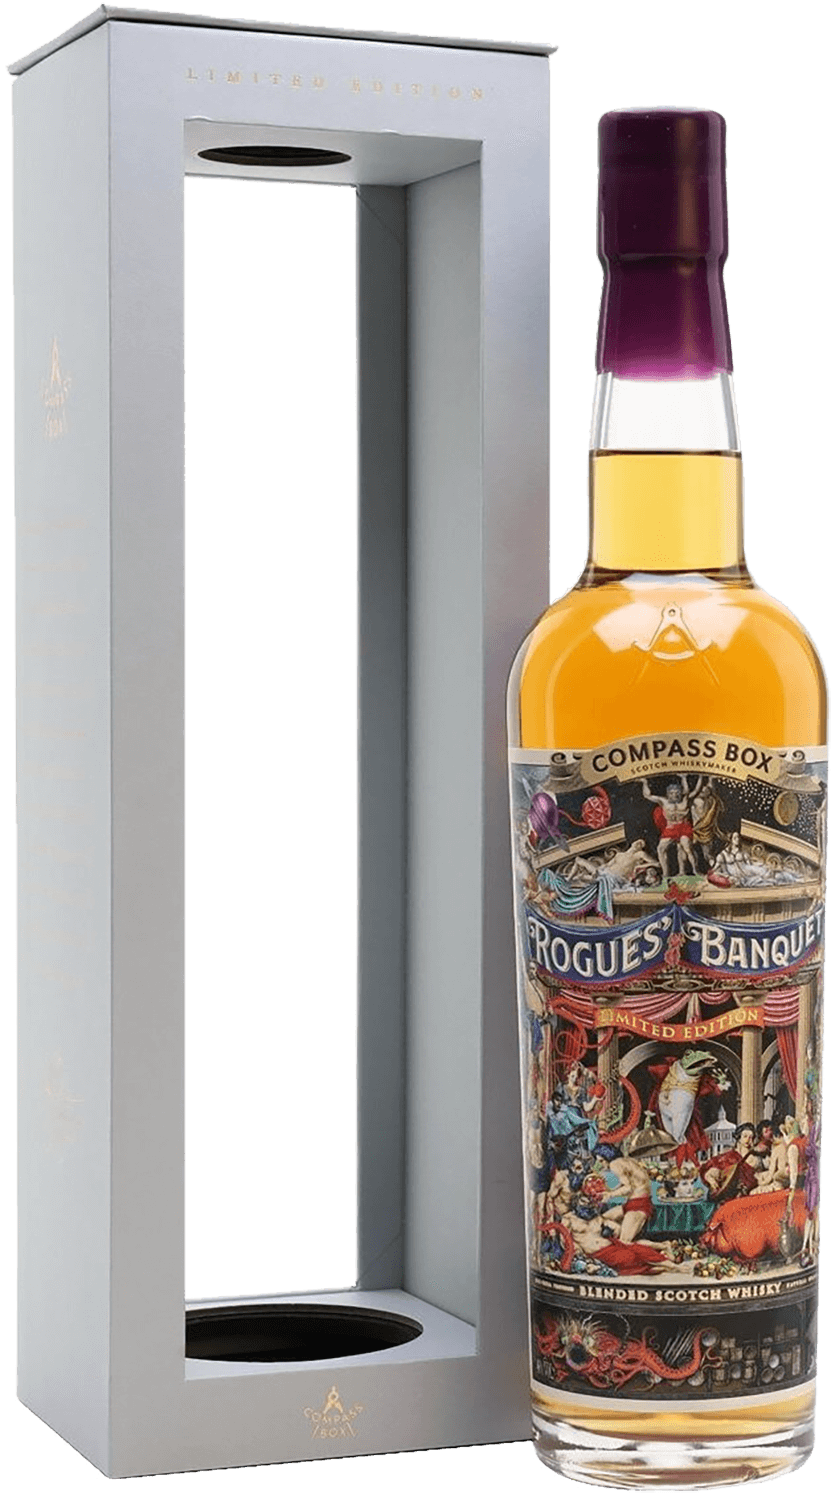 Compass Box Rogues' Banquet Blended Scotch Whisky (gift box) compass box peat monster blended malt scotch whisky